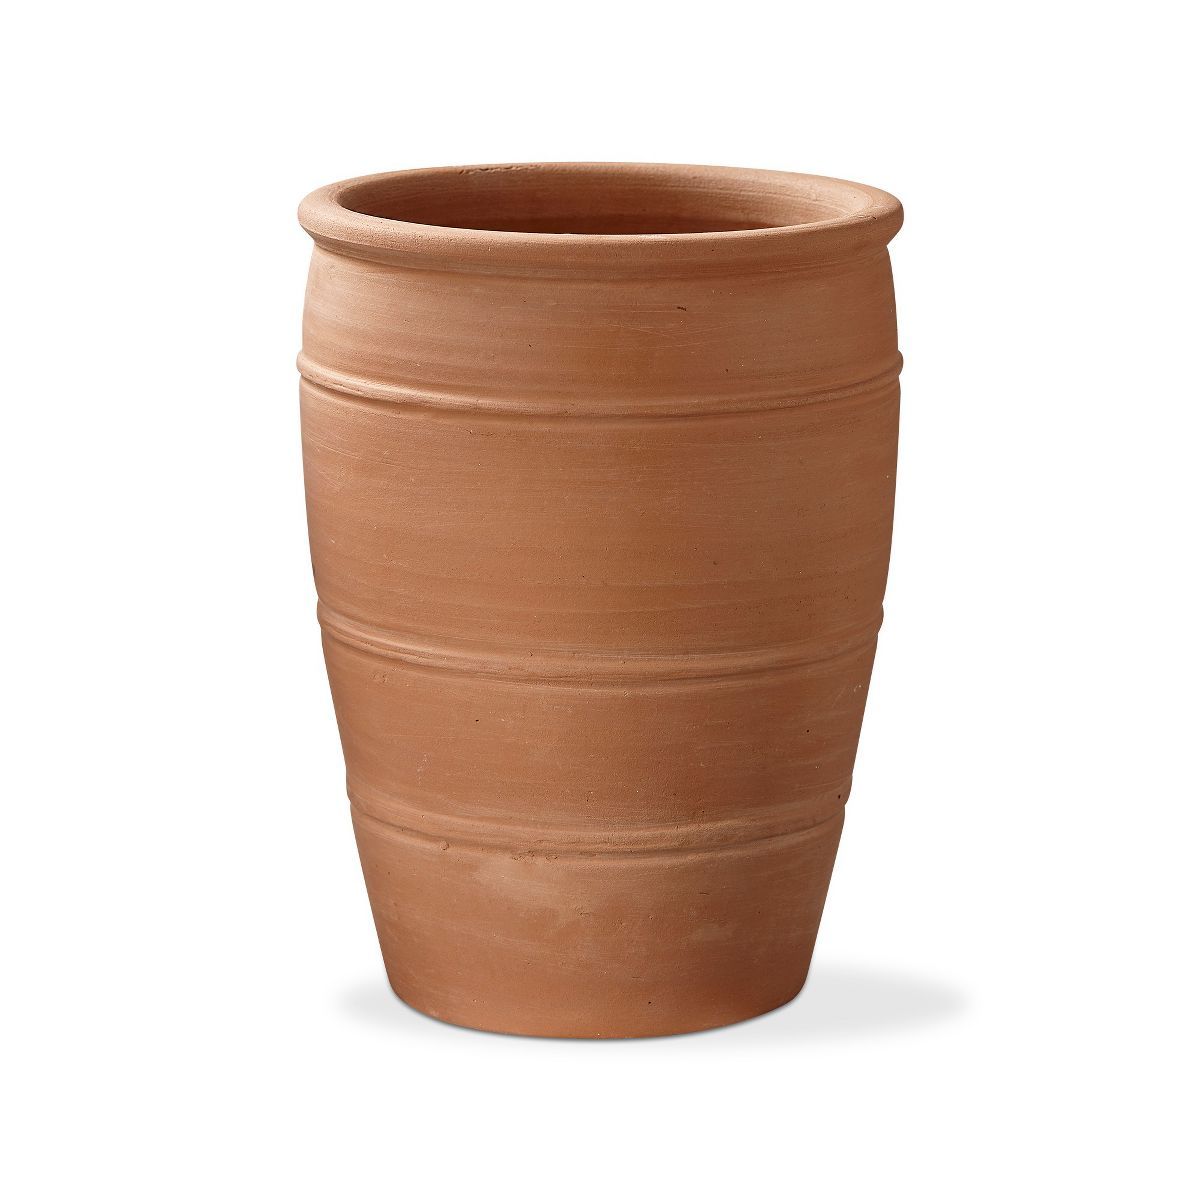 tagltd Vista Terracotta Planter Large, 7.5L x 7.5W x 10HH inches, Holds Up to 6 inch Drop in Pot | Target